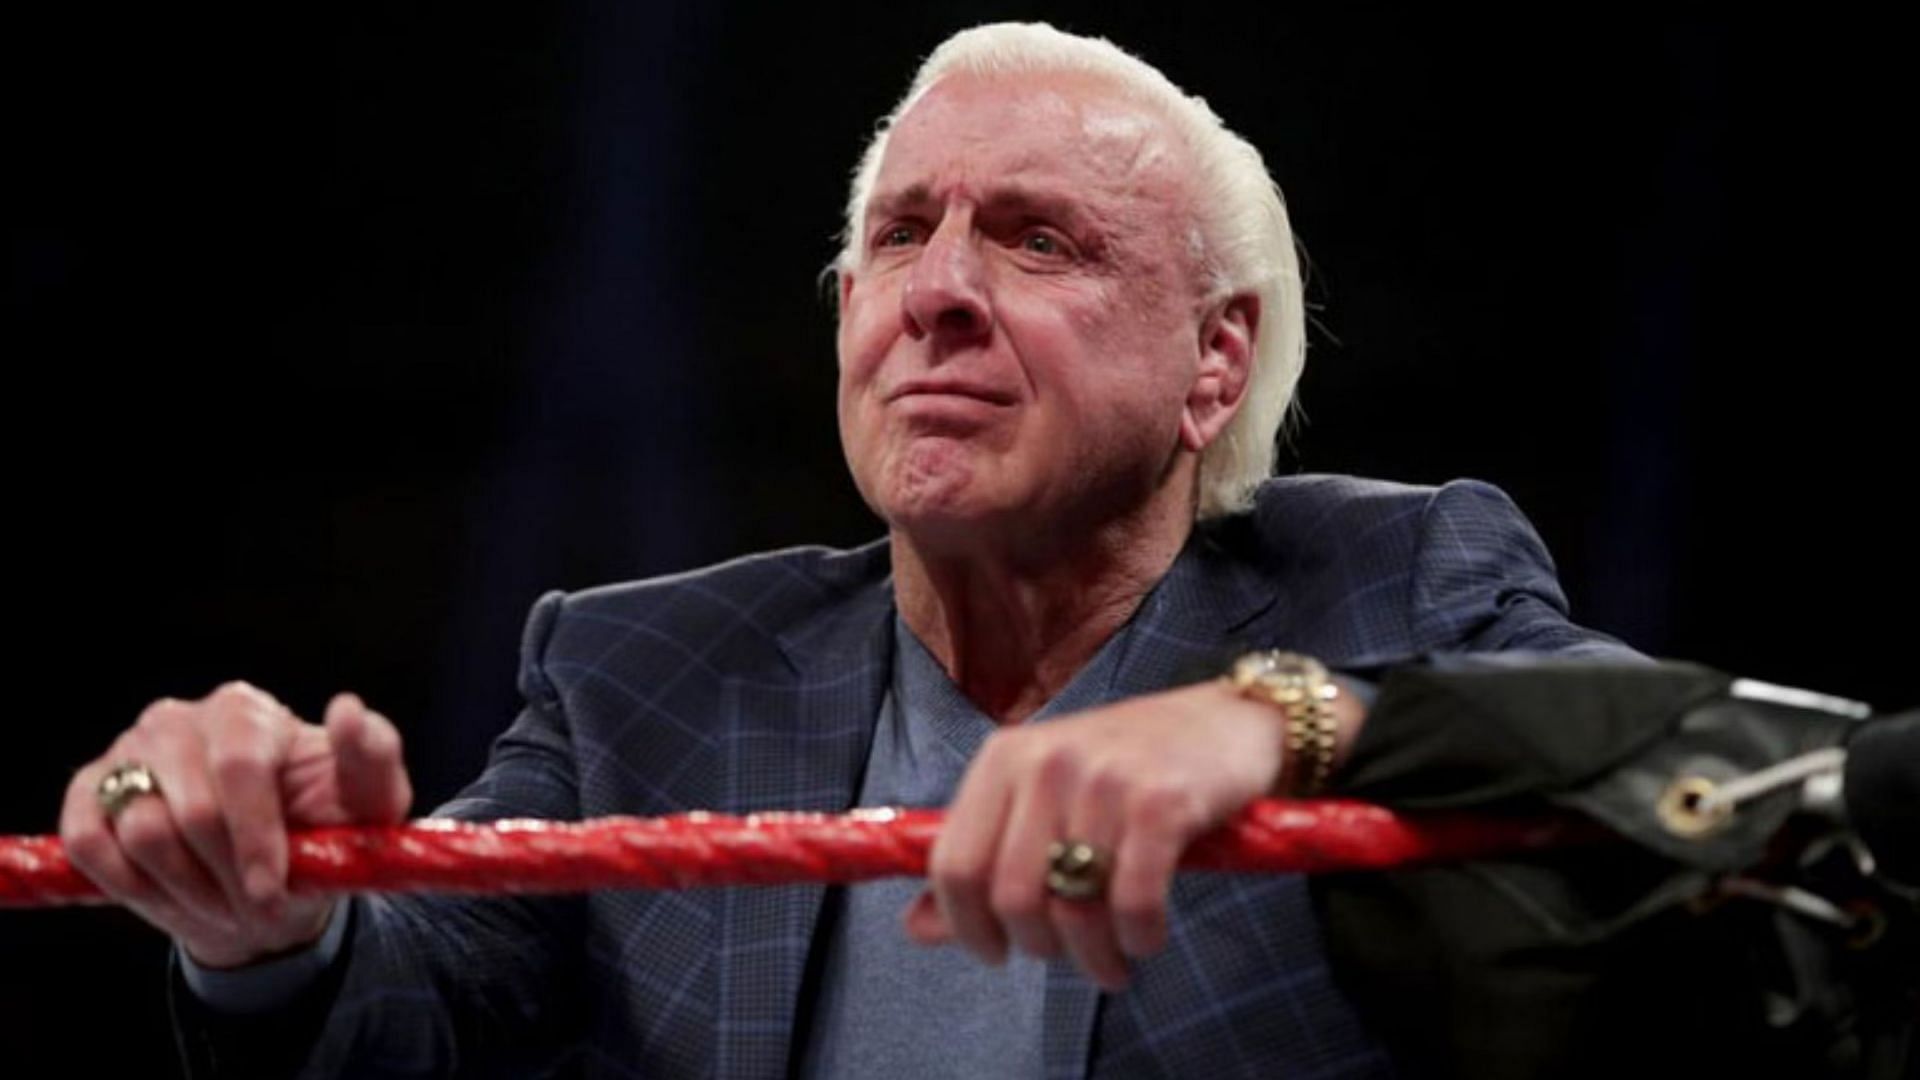 WWE Hall of Famer Ric Flair apologized to Gwen Worthen